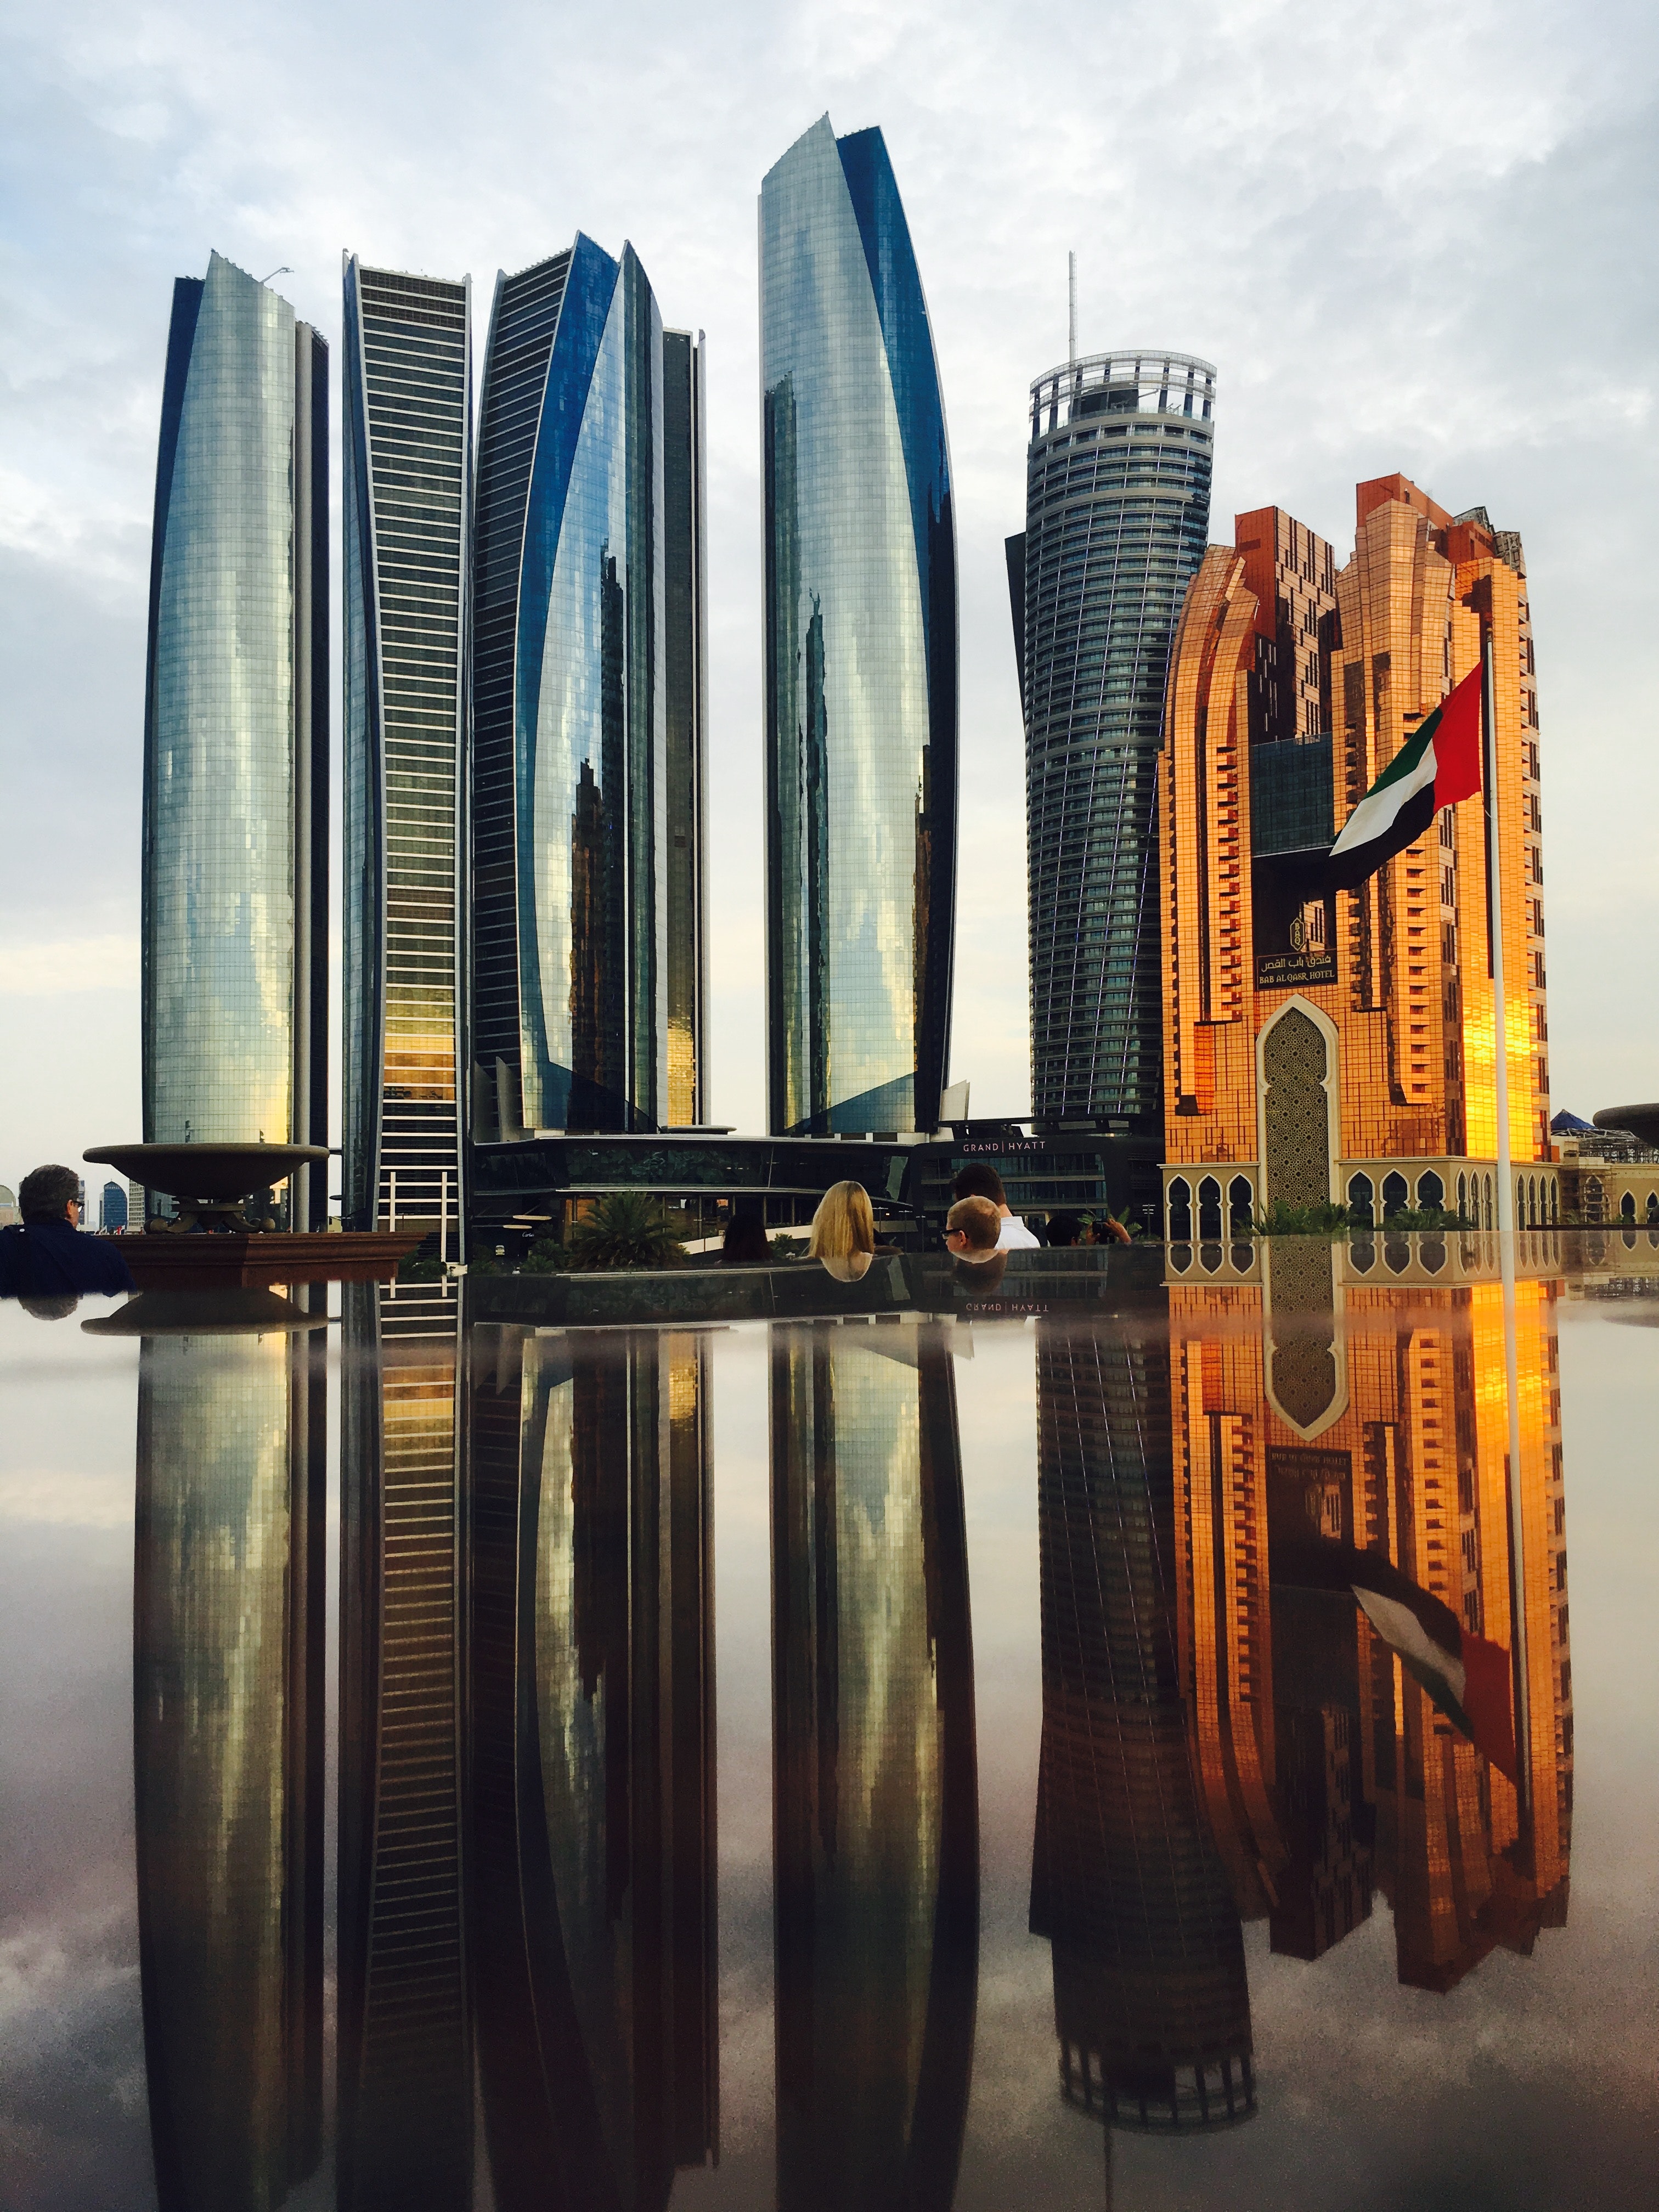 Reflection of skyscrapers in city photo